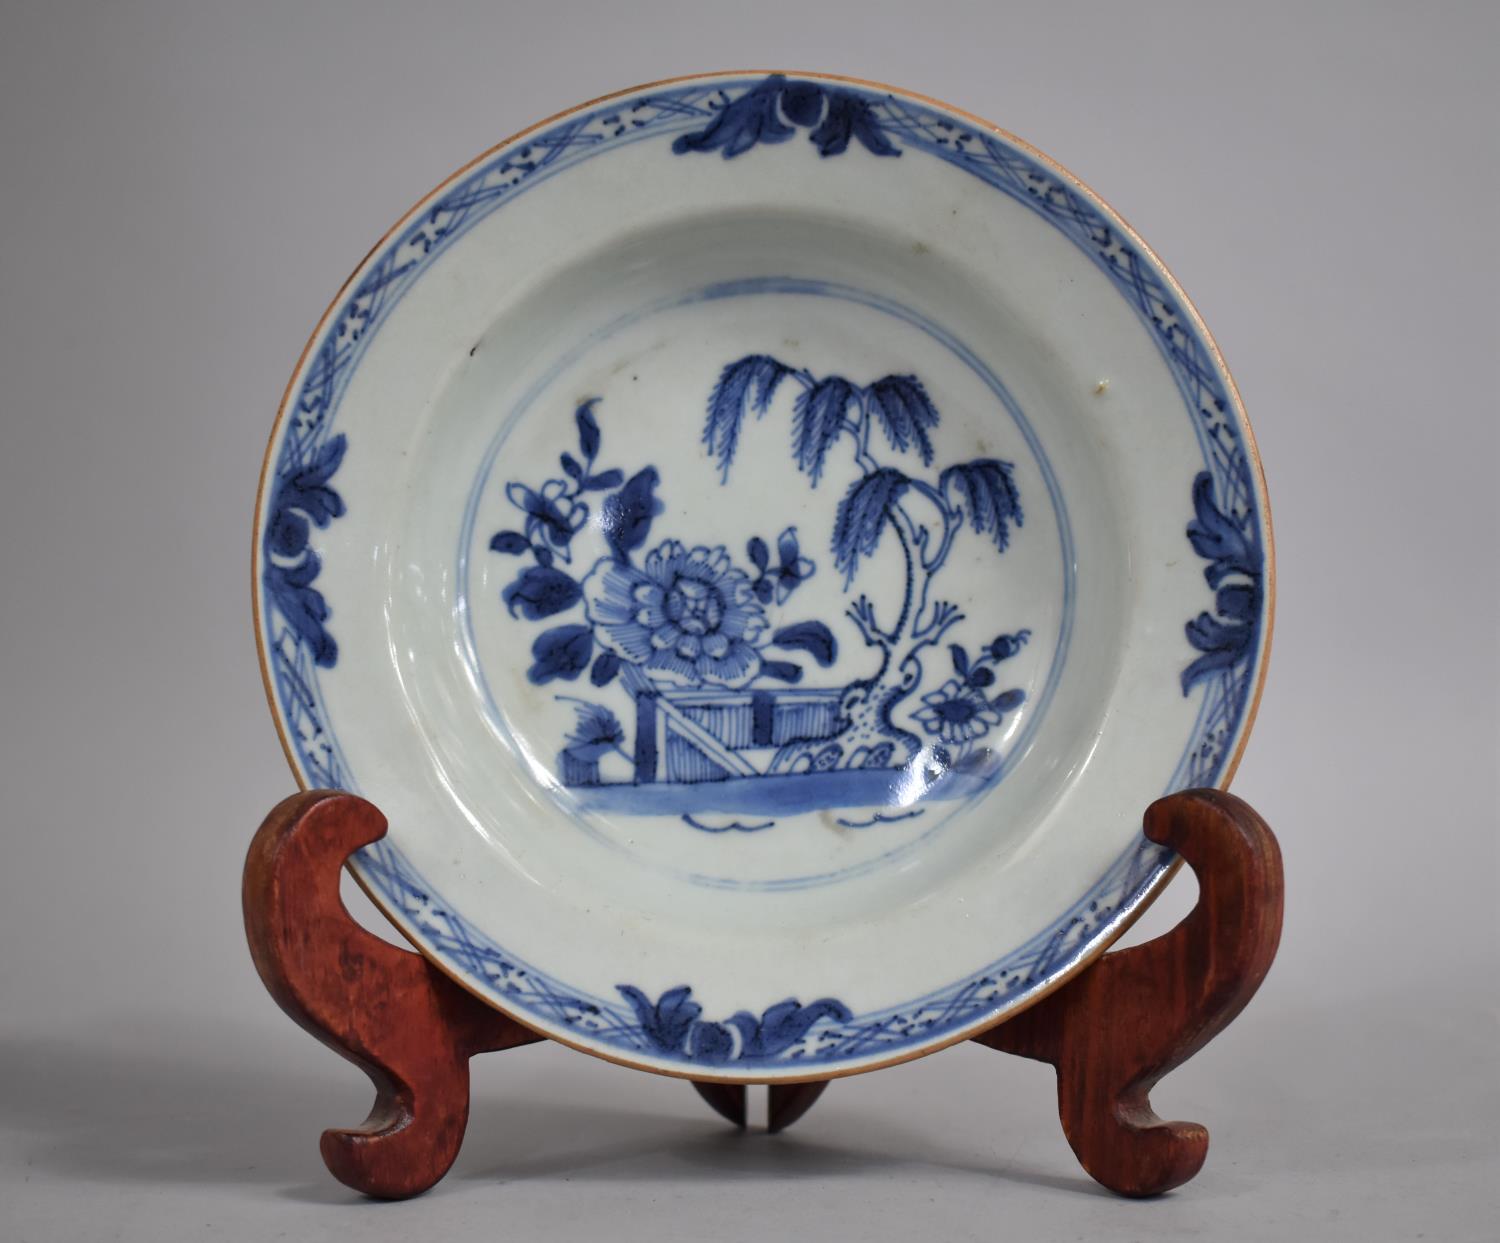 An 18th/19th Century Chinese Porcelain Dish Decorated with Willow Tree and Blooming Flower in Walled